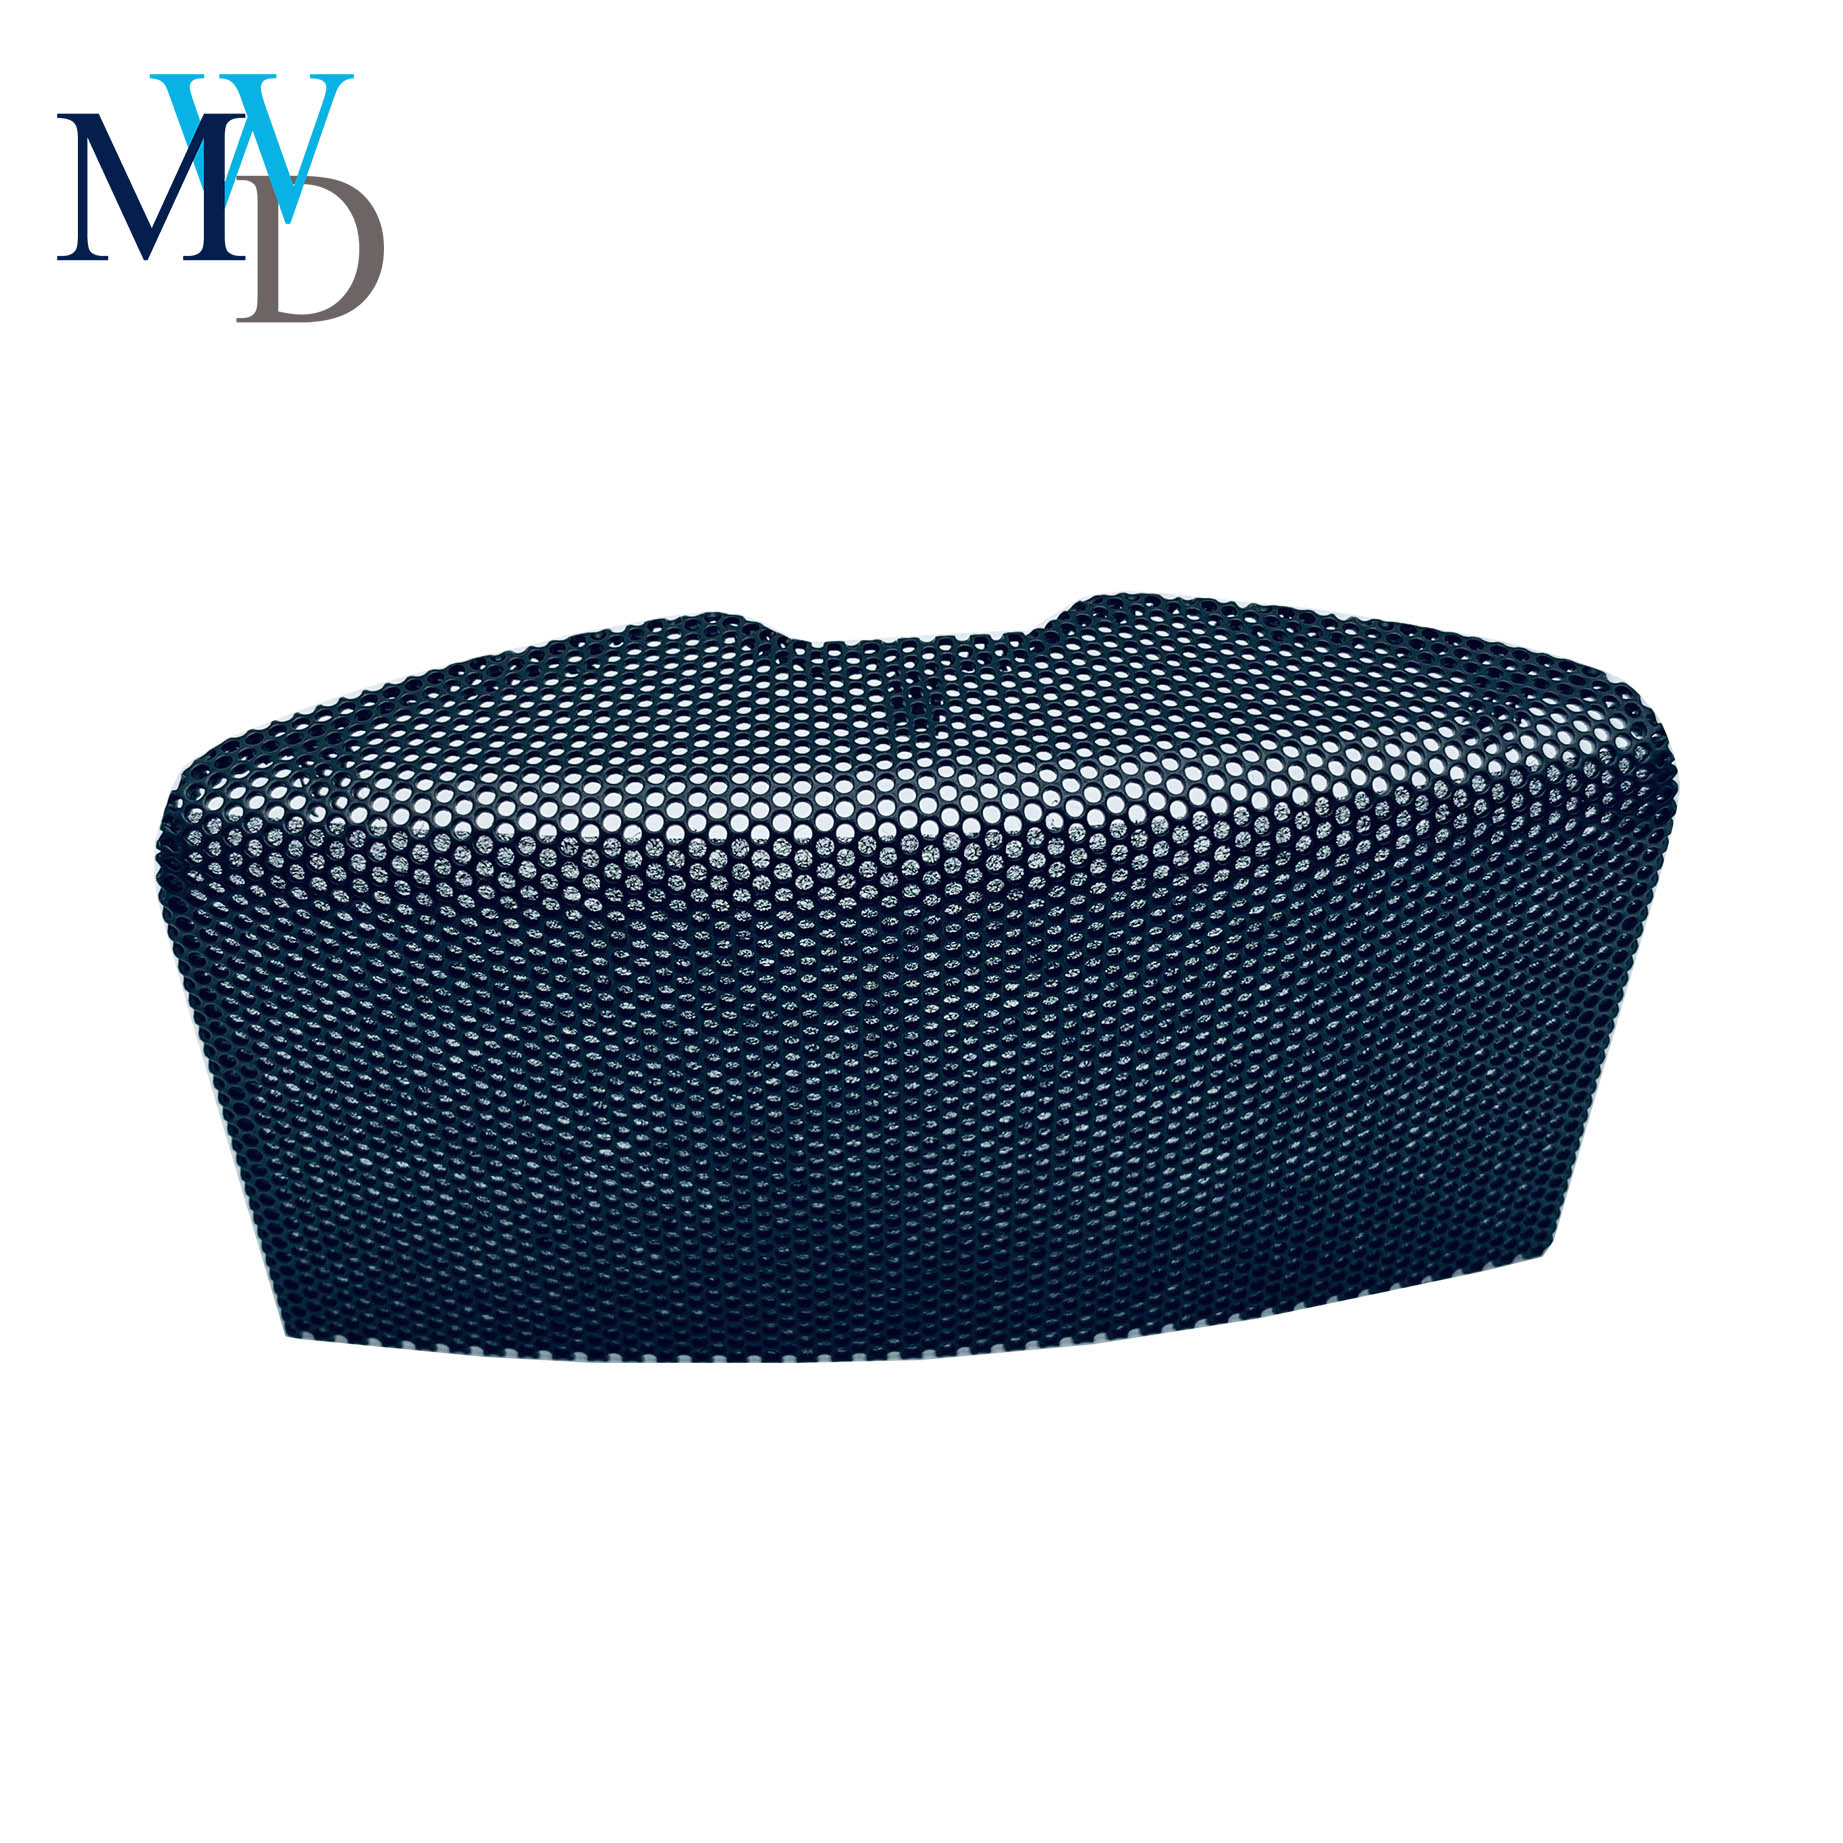 Custom Perforated Black Coated Metal Car Speaker Grille with fabric